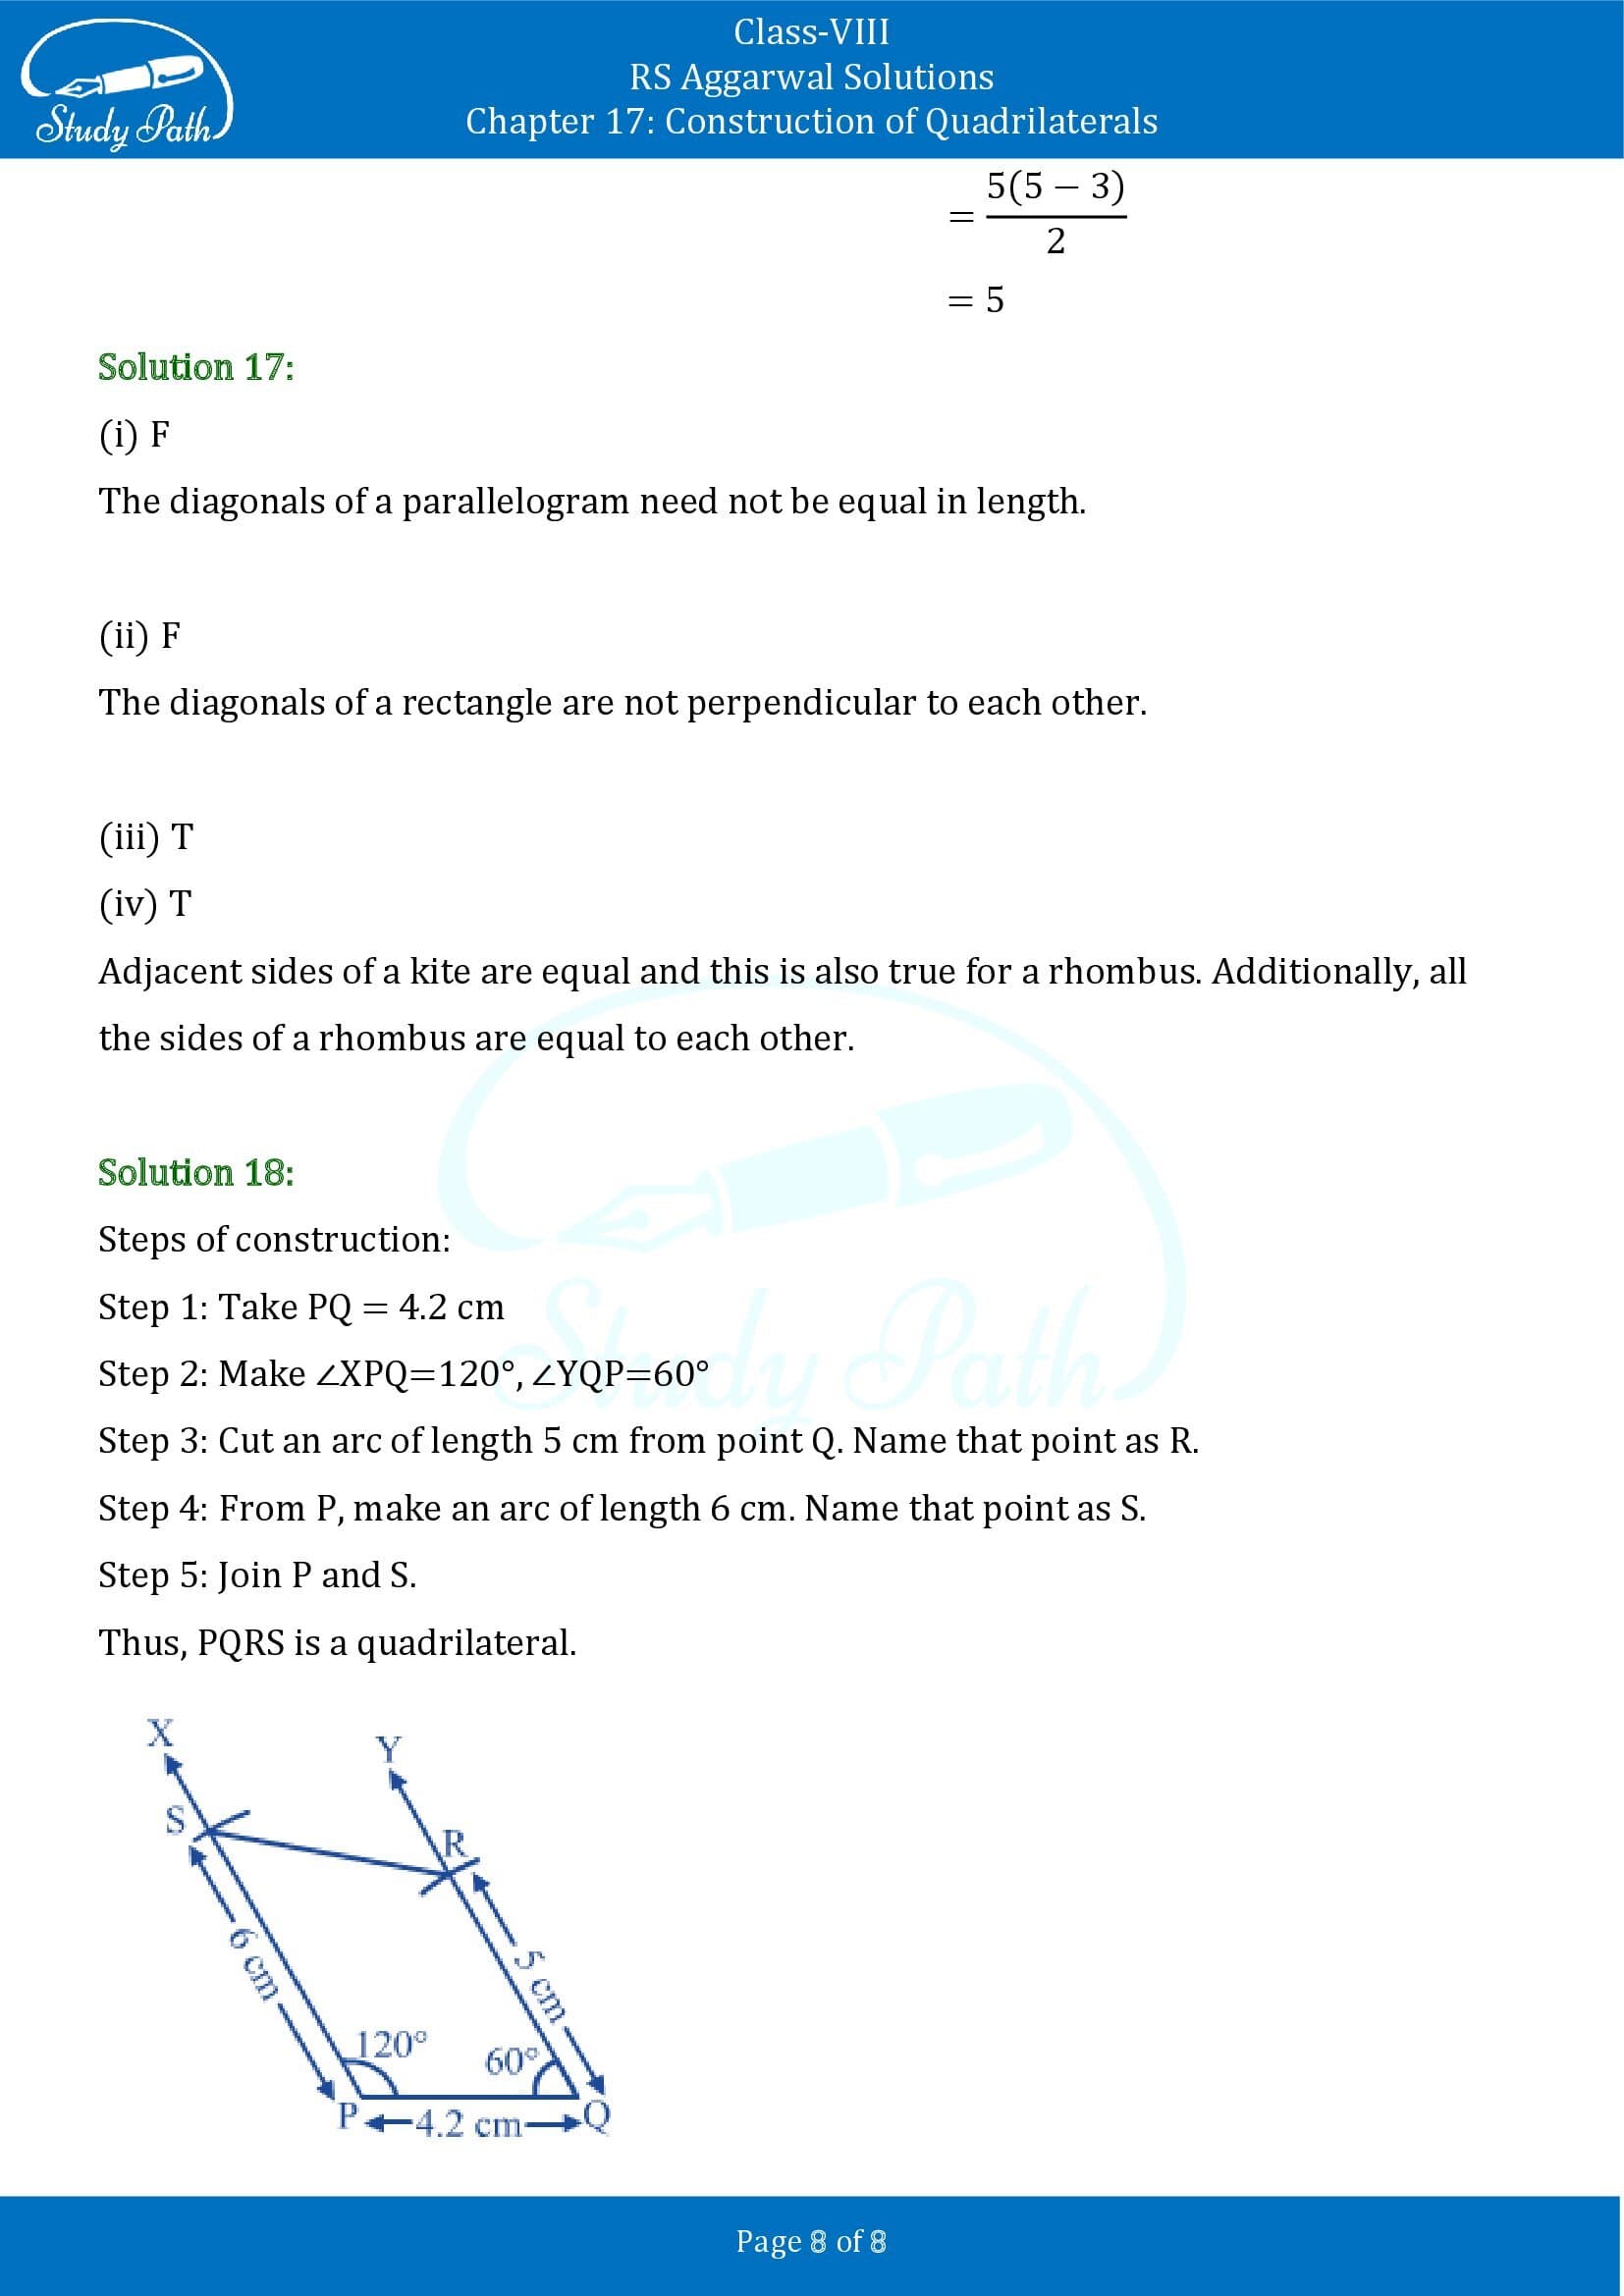 RS Aggarwal Solutions Class 8 Chapter 17 Construction of Quadrilaterals Test Paper 0008